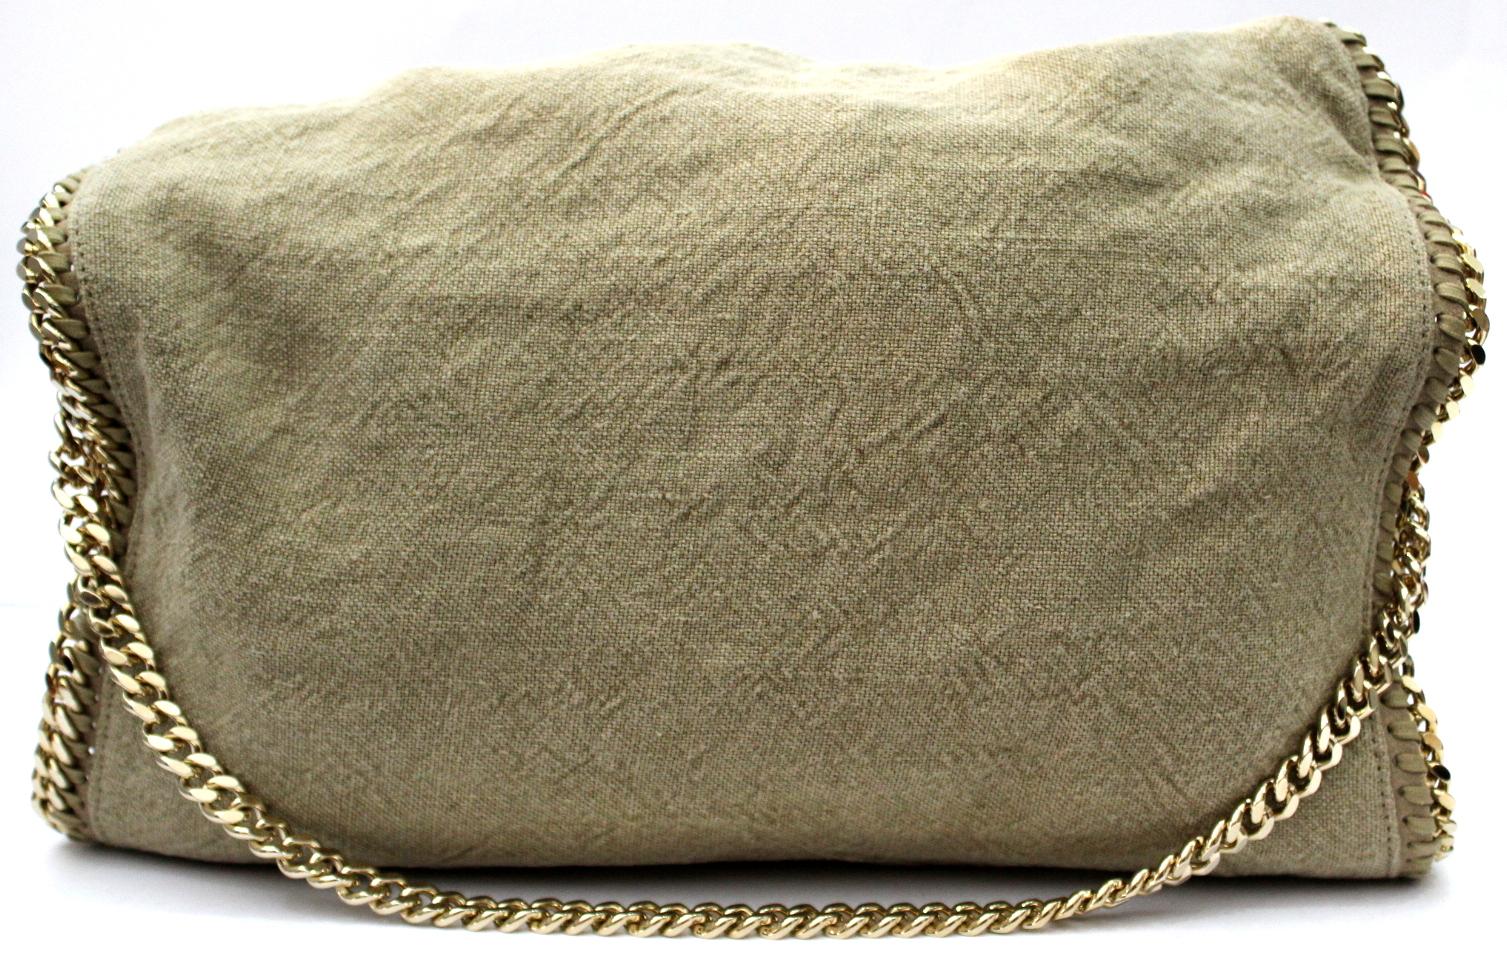 
Stella McCartney Falabella model in beige linen.
Equipped with 3 chains that allow you to wear it in different ways.
Large size, internally capacious.
Very good condition!